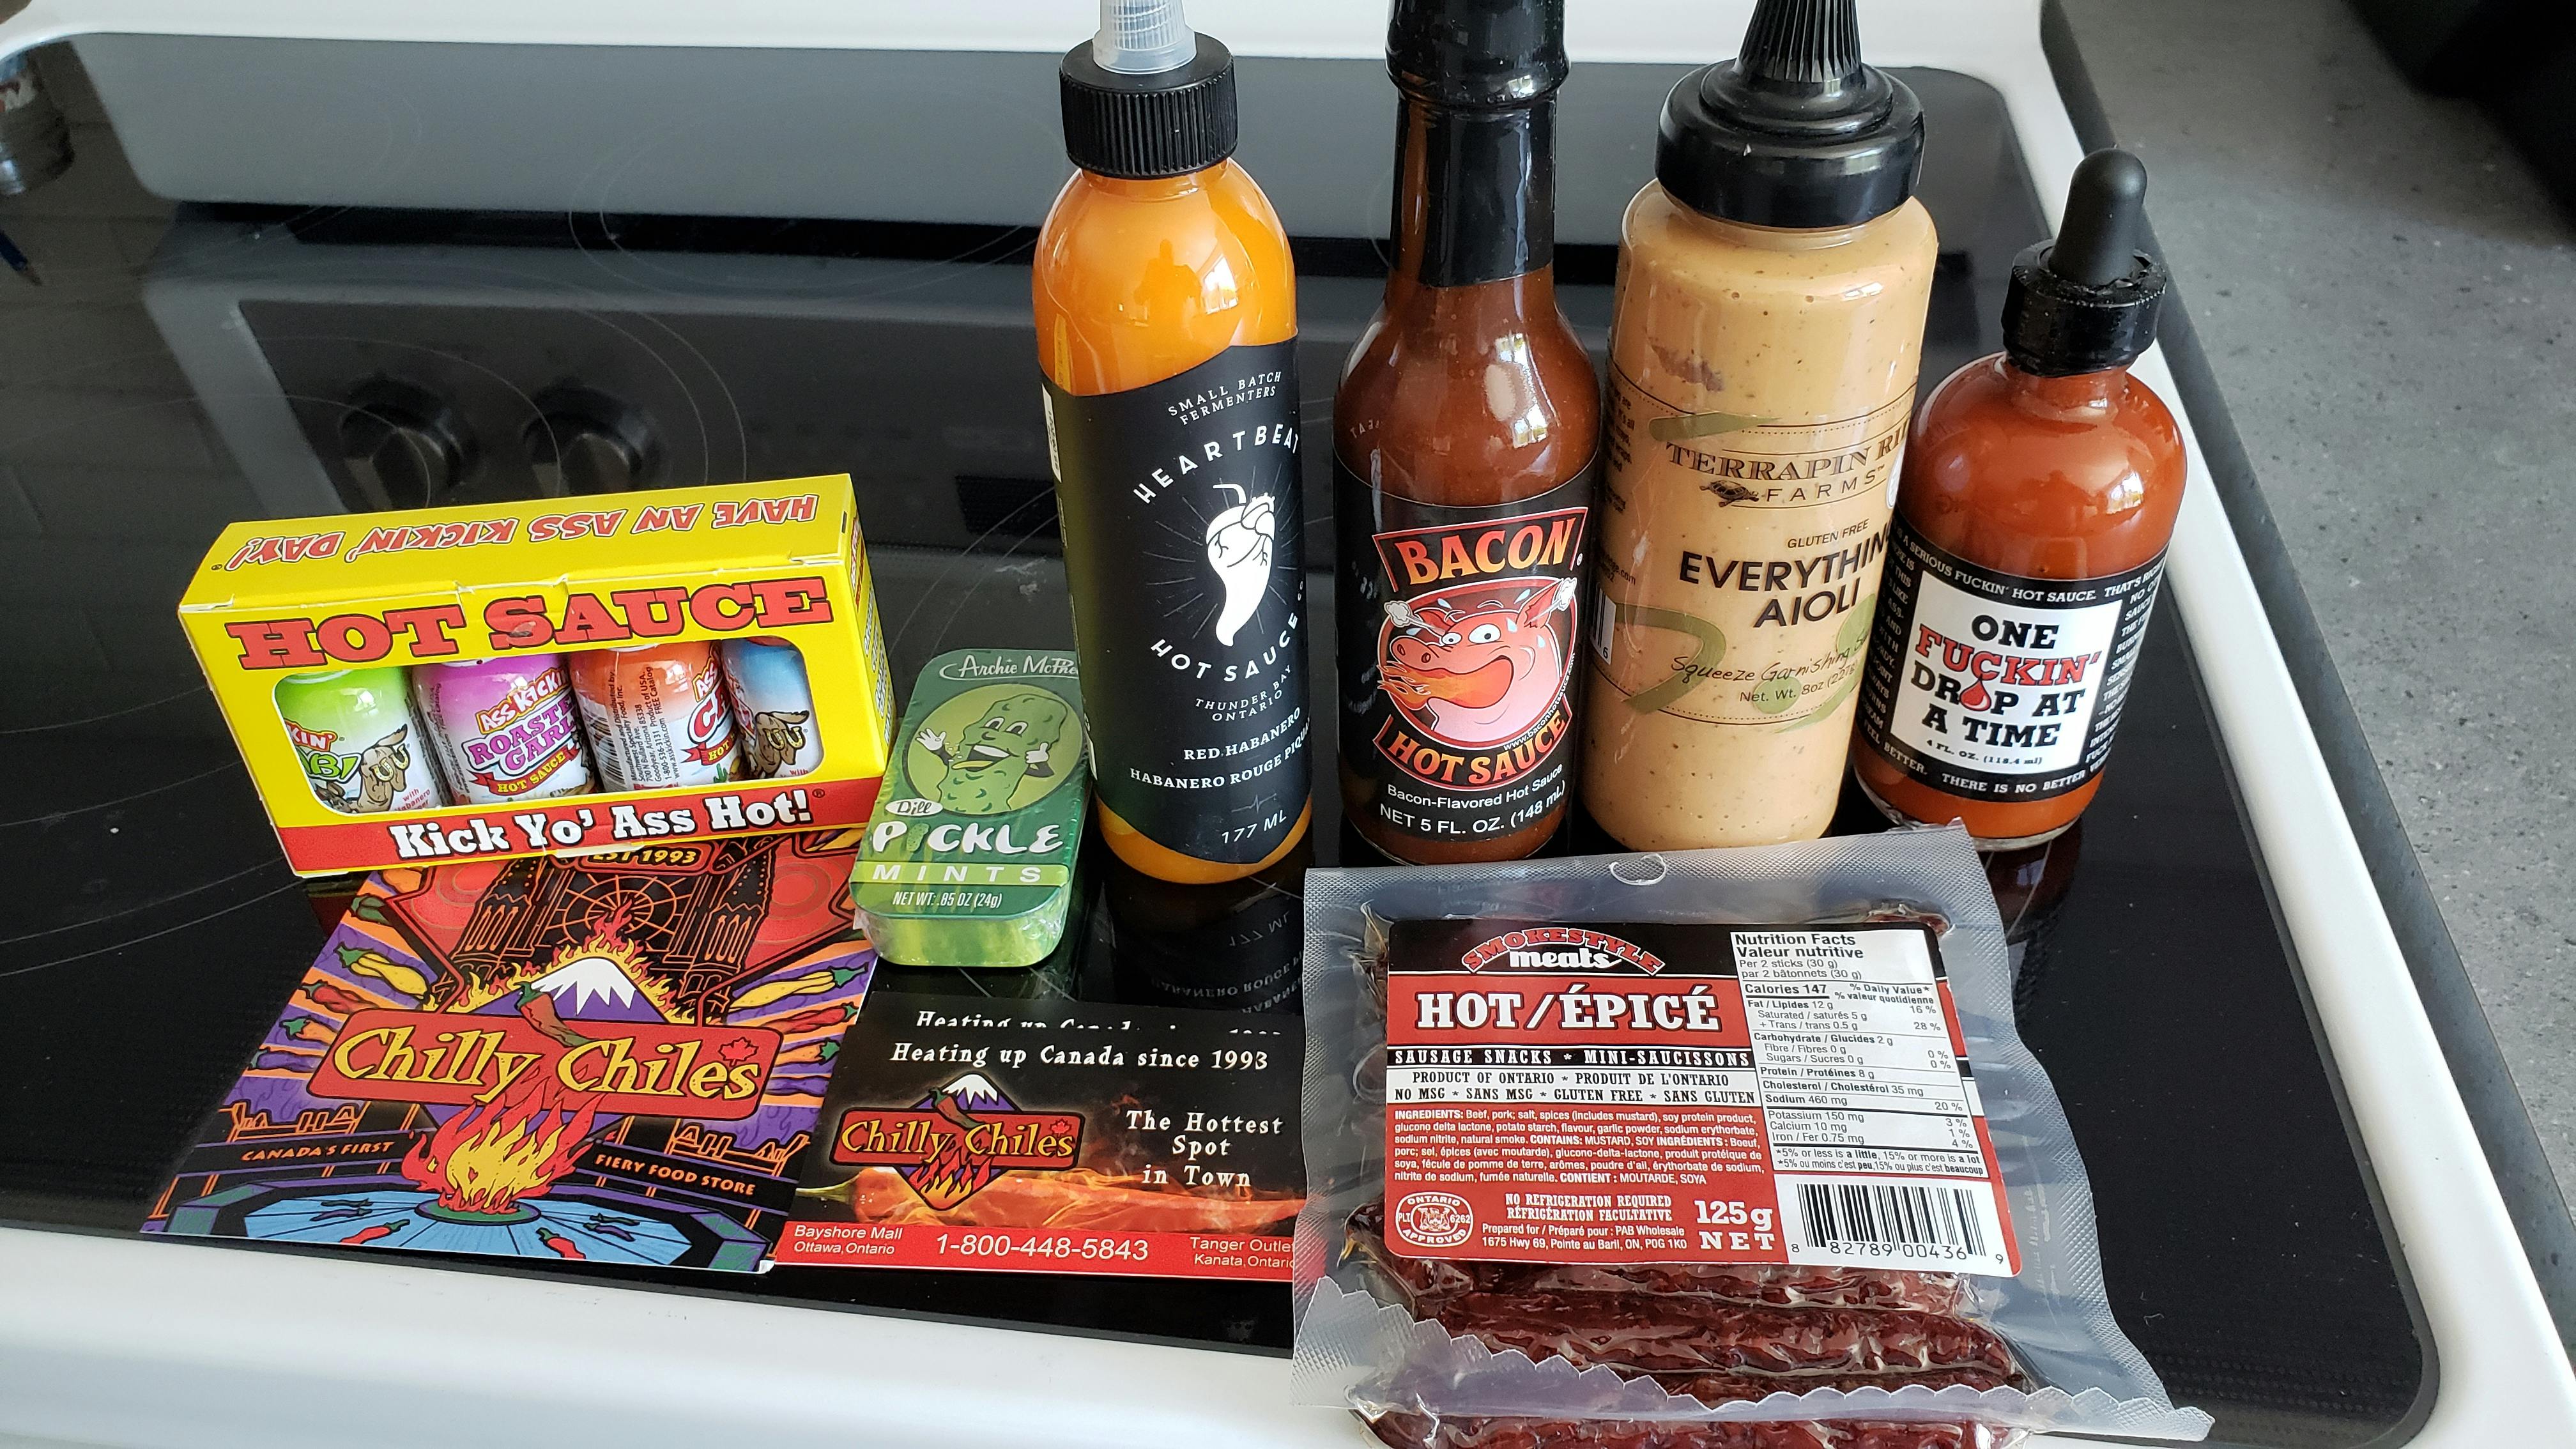 heartbeat hot sauce review